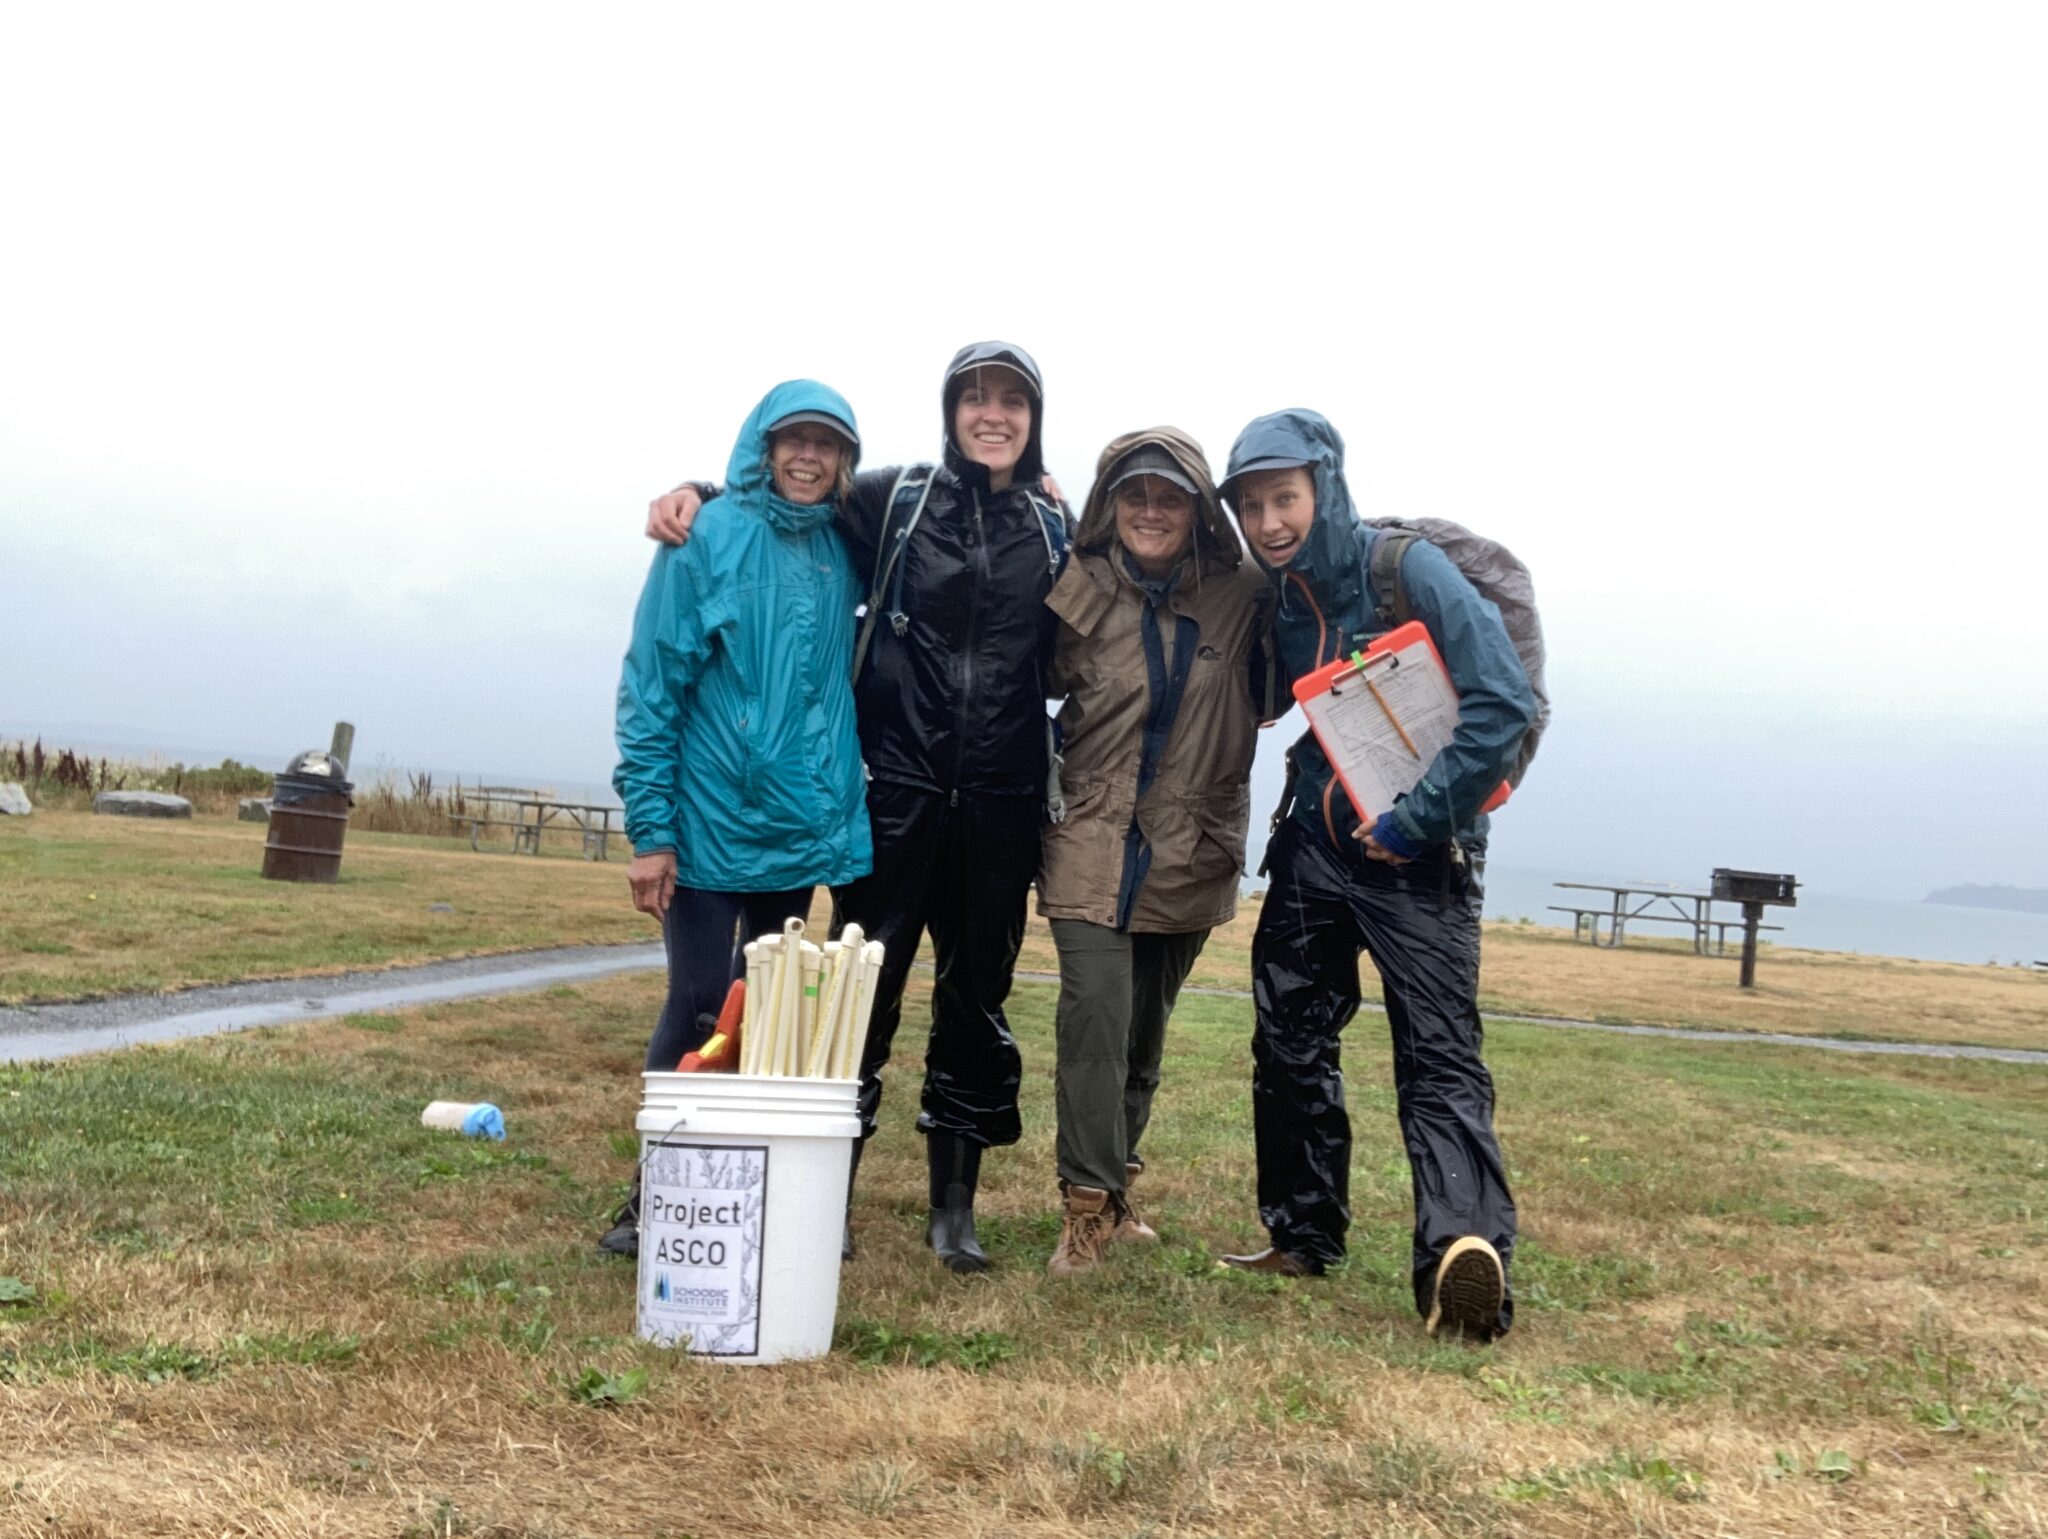 Volunteers join Schoodic Project ASco researchers in the field on a rainy day to collect data.